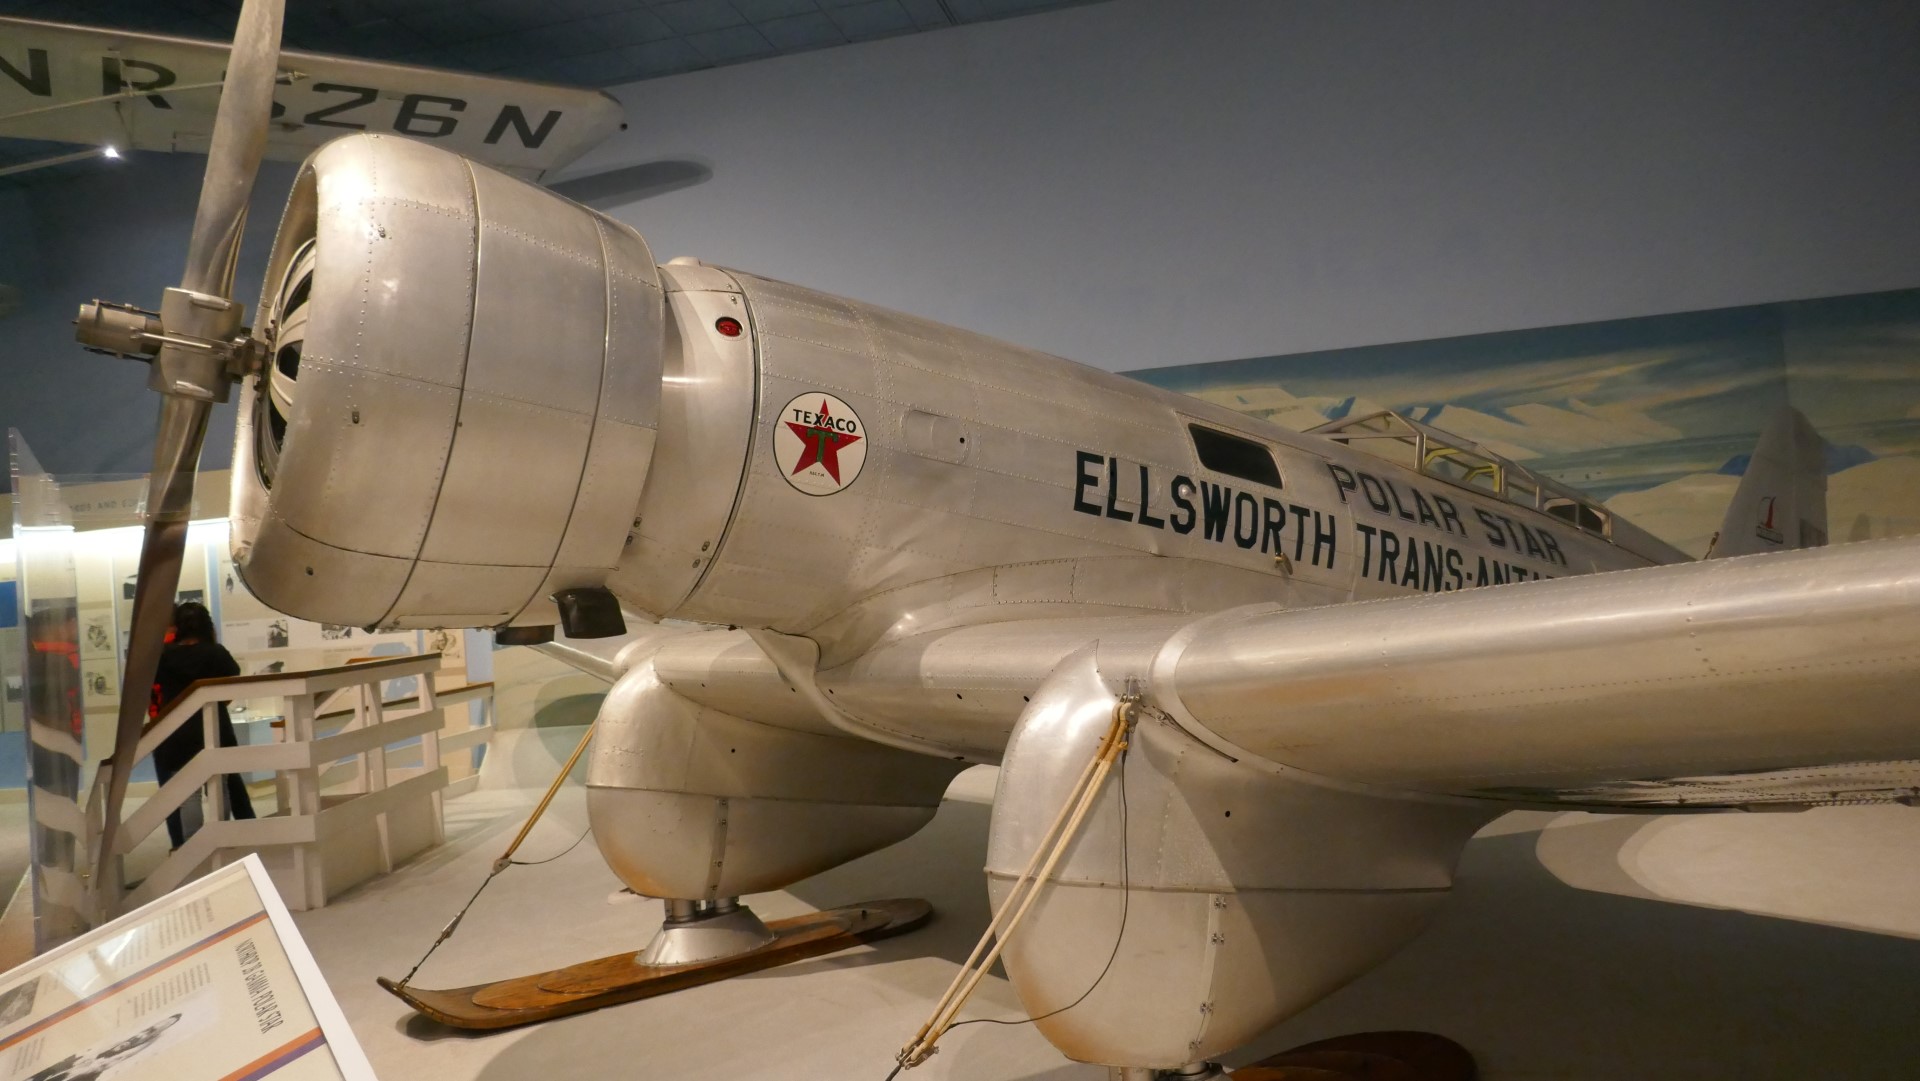 Lincoln Ellsworth’s Polar plane in the National Air and Space Museum in Washington DC.